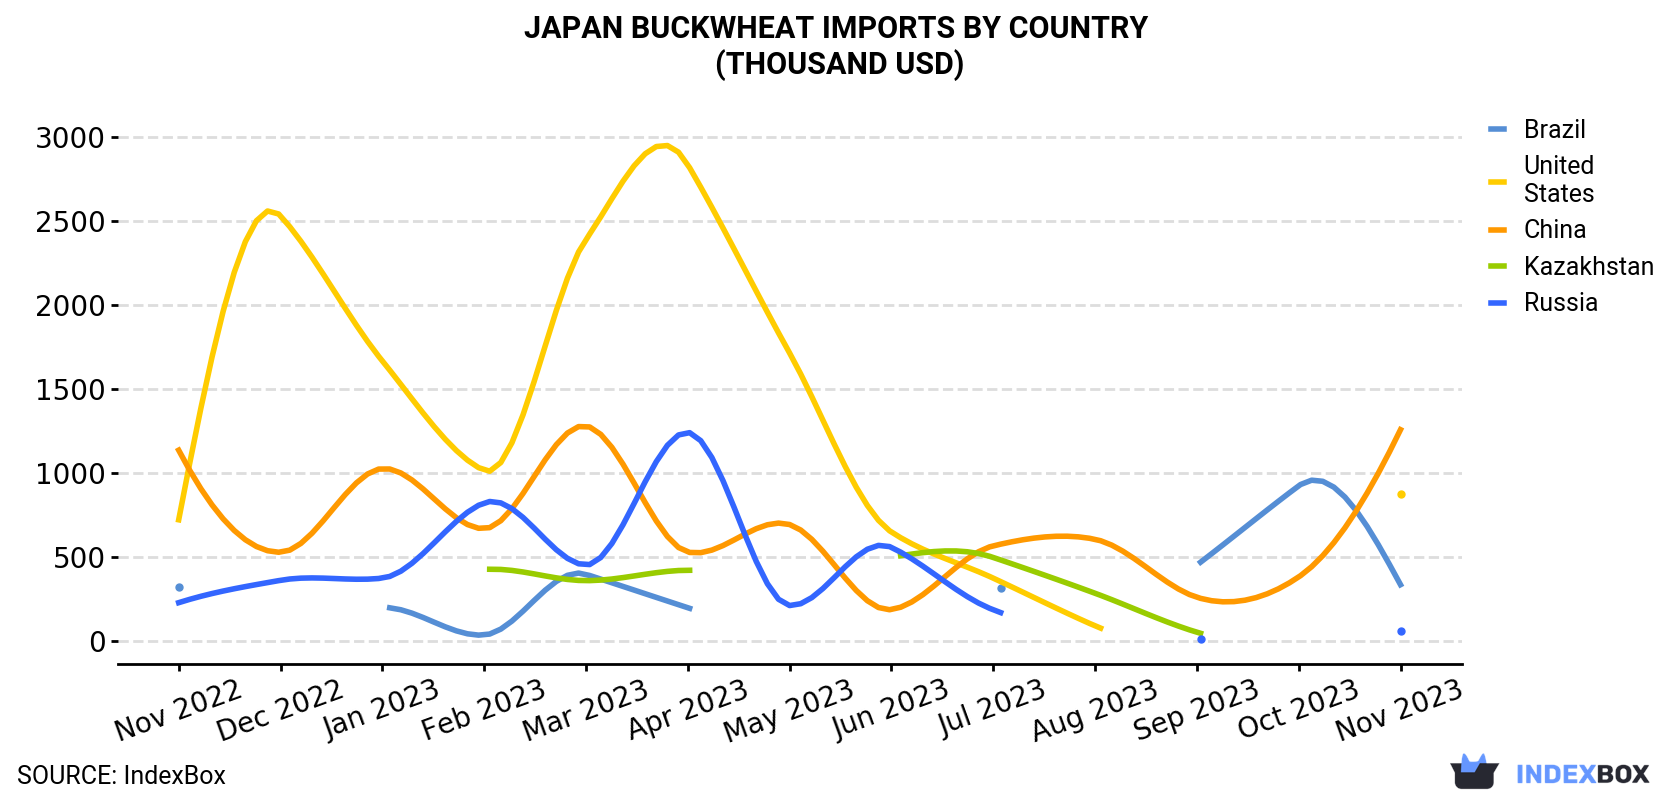 Japan Buckwheat Imports By Country (Thousand USD)